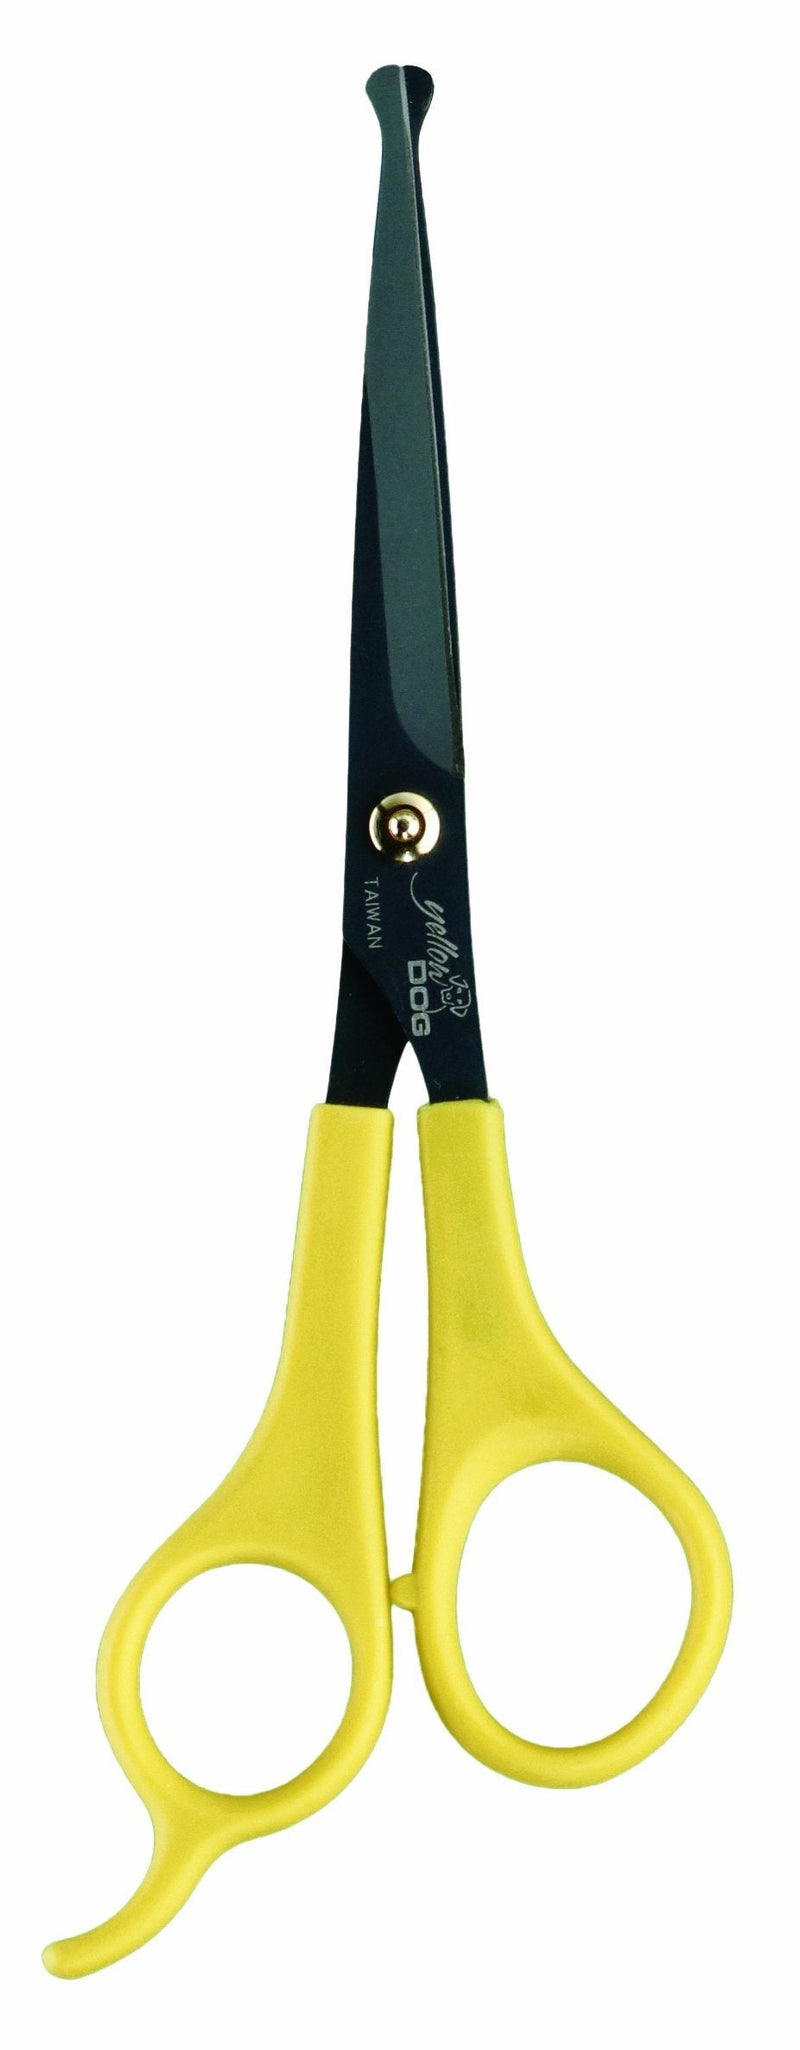 [Australia] - ConairPRO Dog Rounded-Tip Shears 6 Inch 